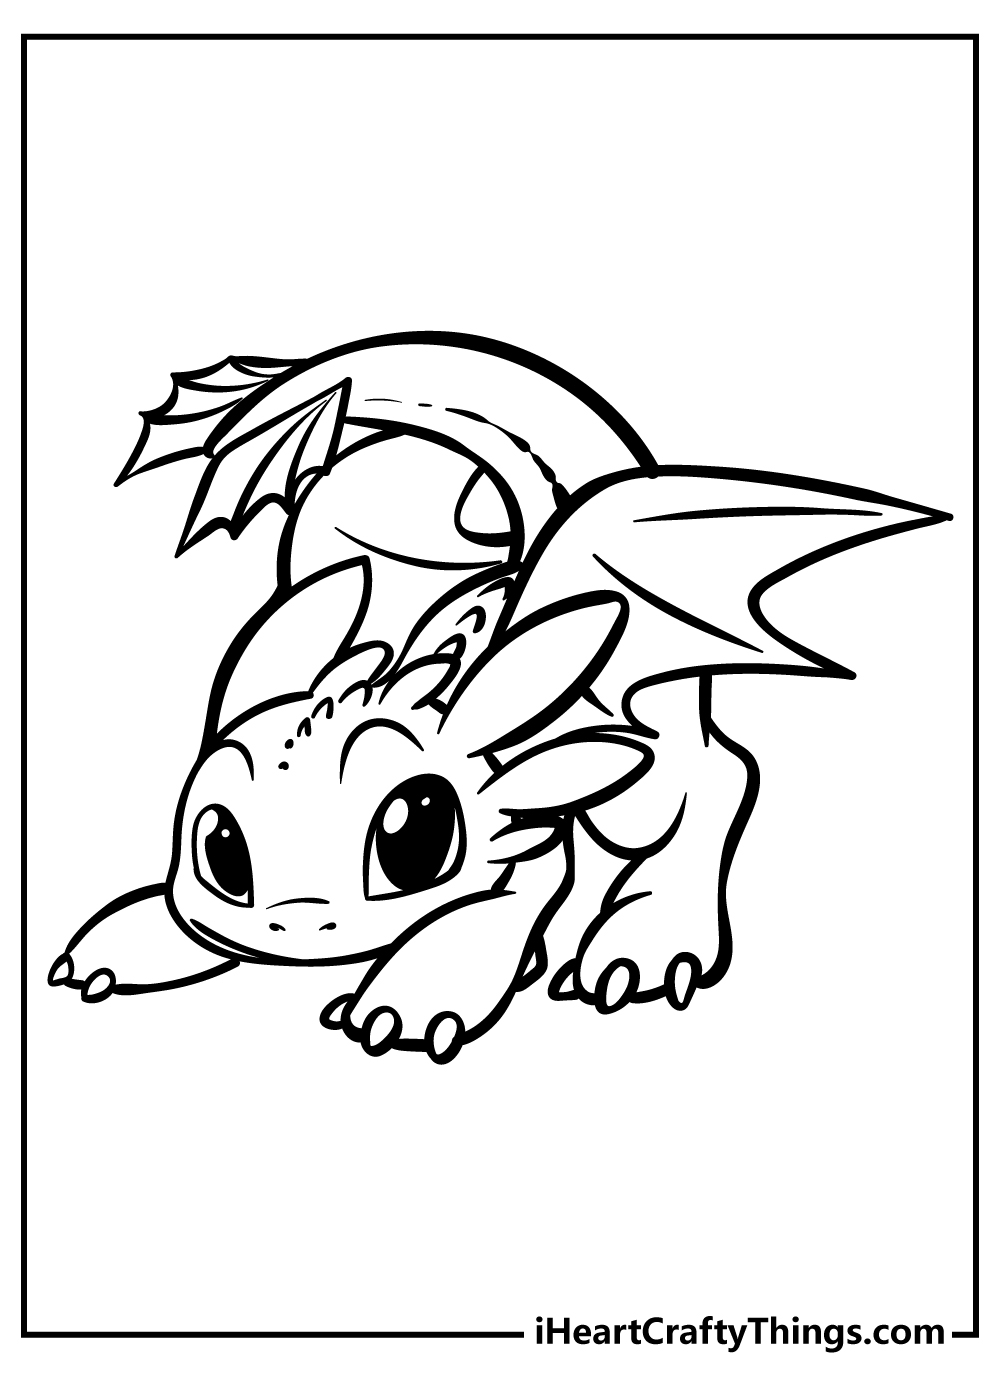 How To Train Your Dragon Coloring Book for kids free printable